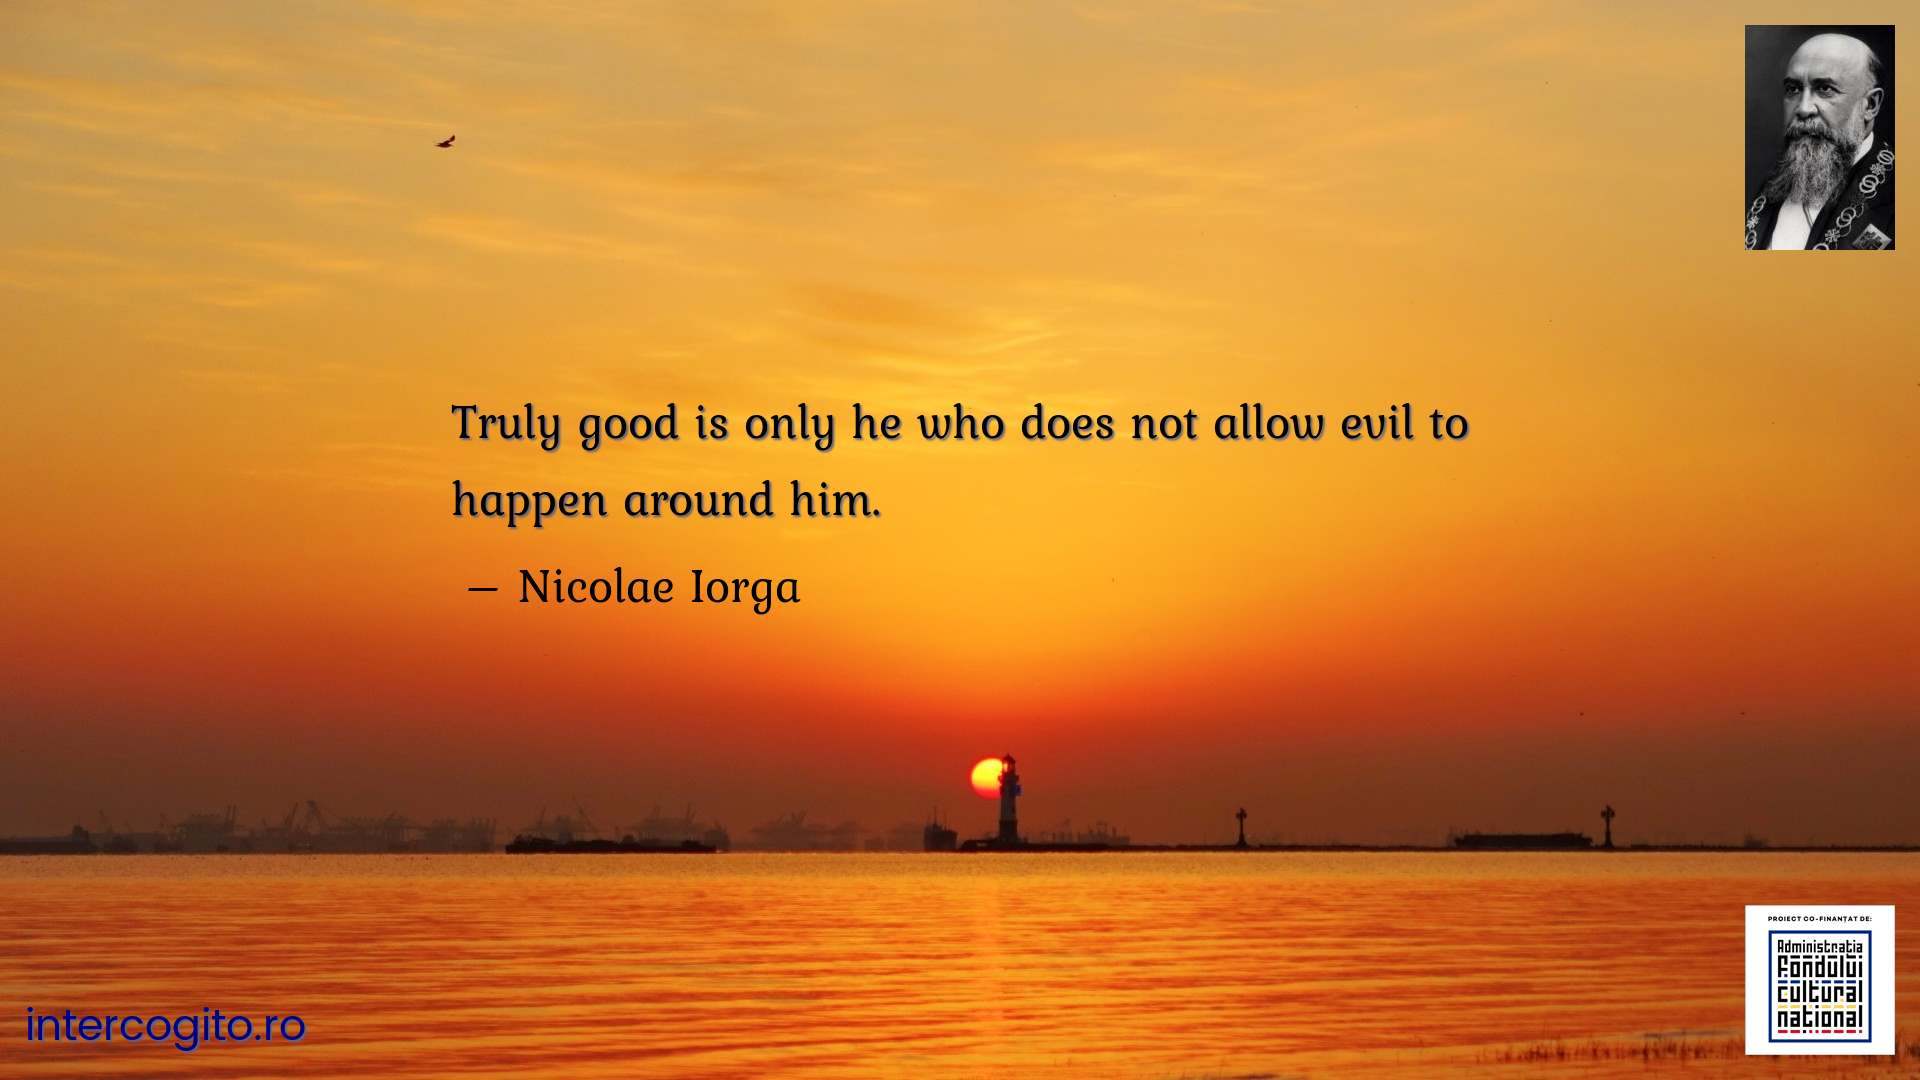 Truly good is only he who does not allow evil to happen around him.